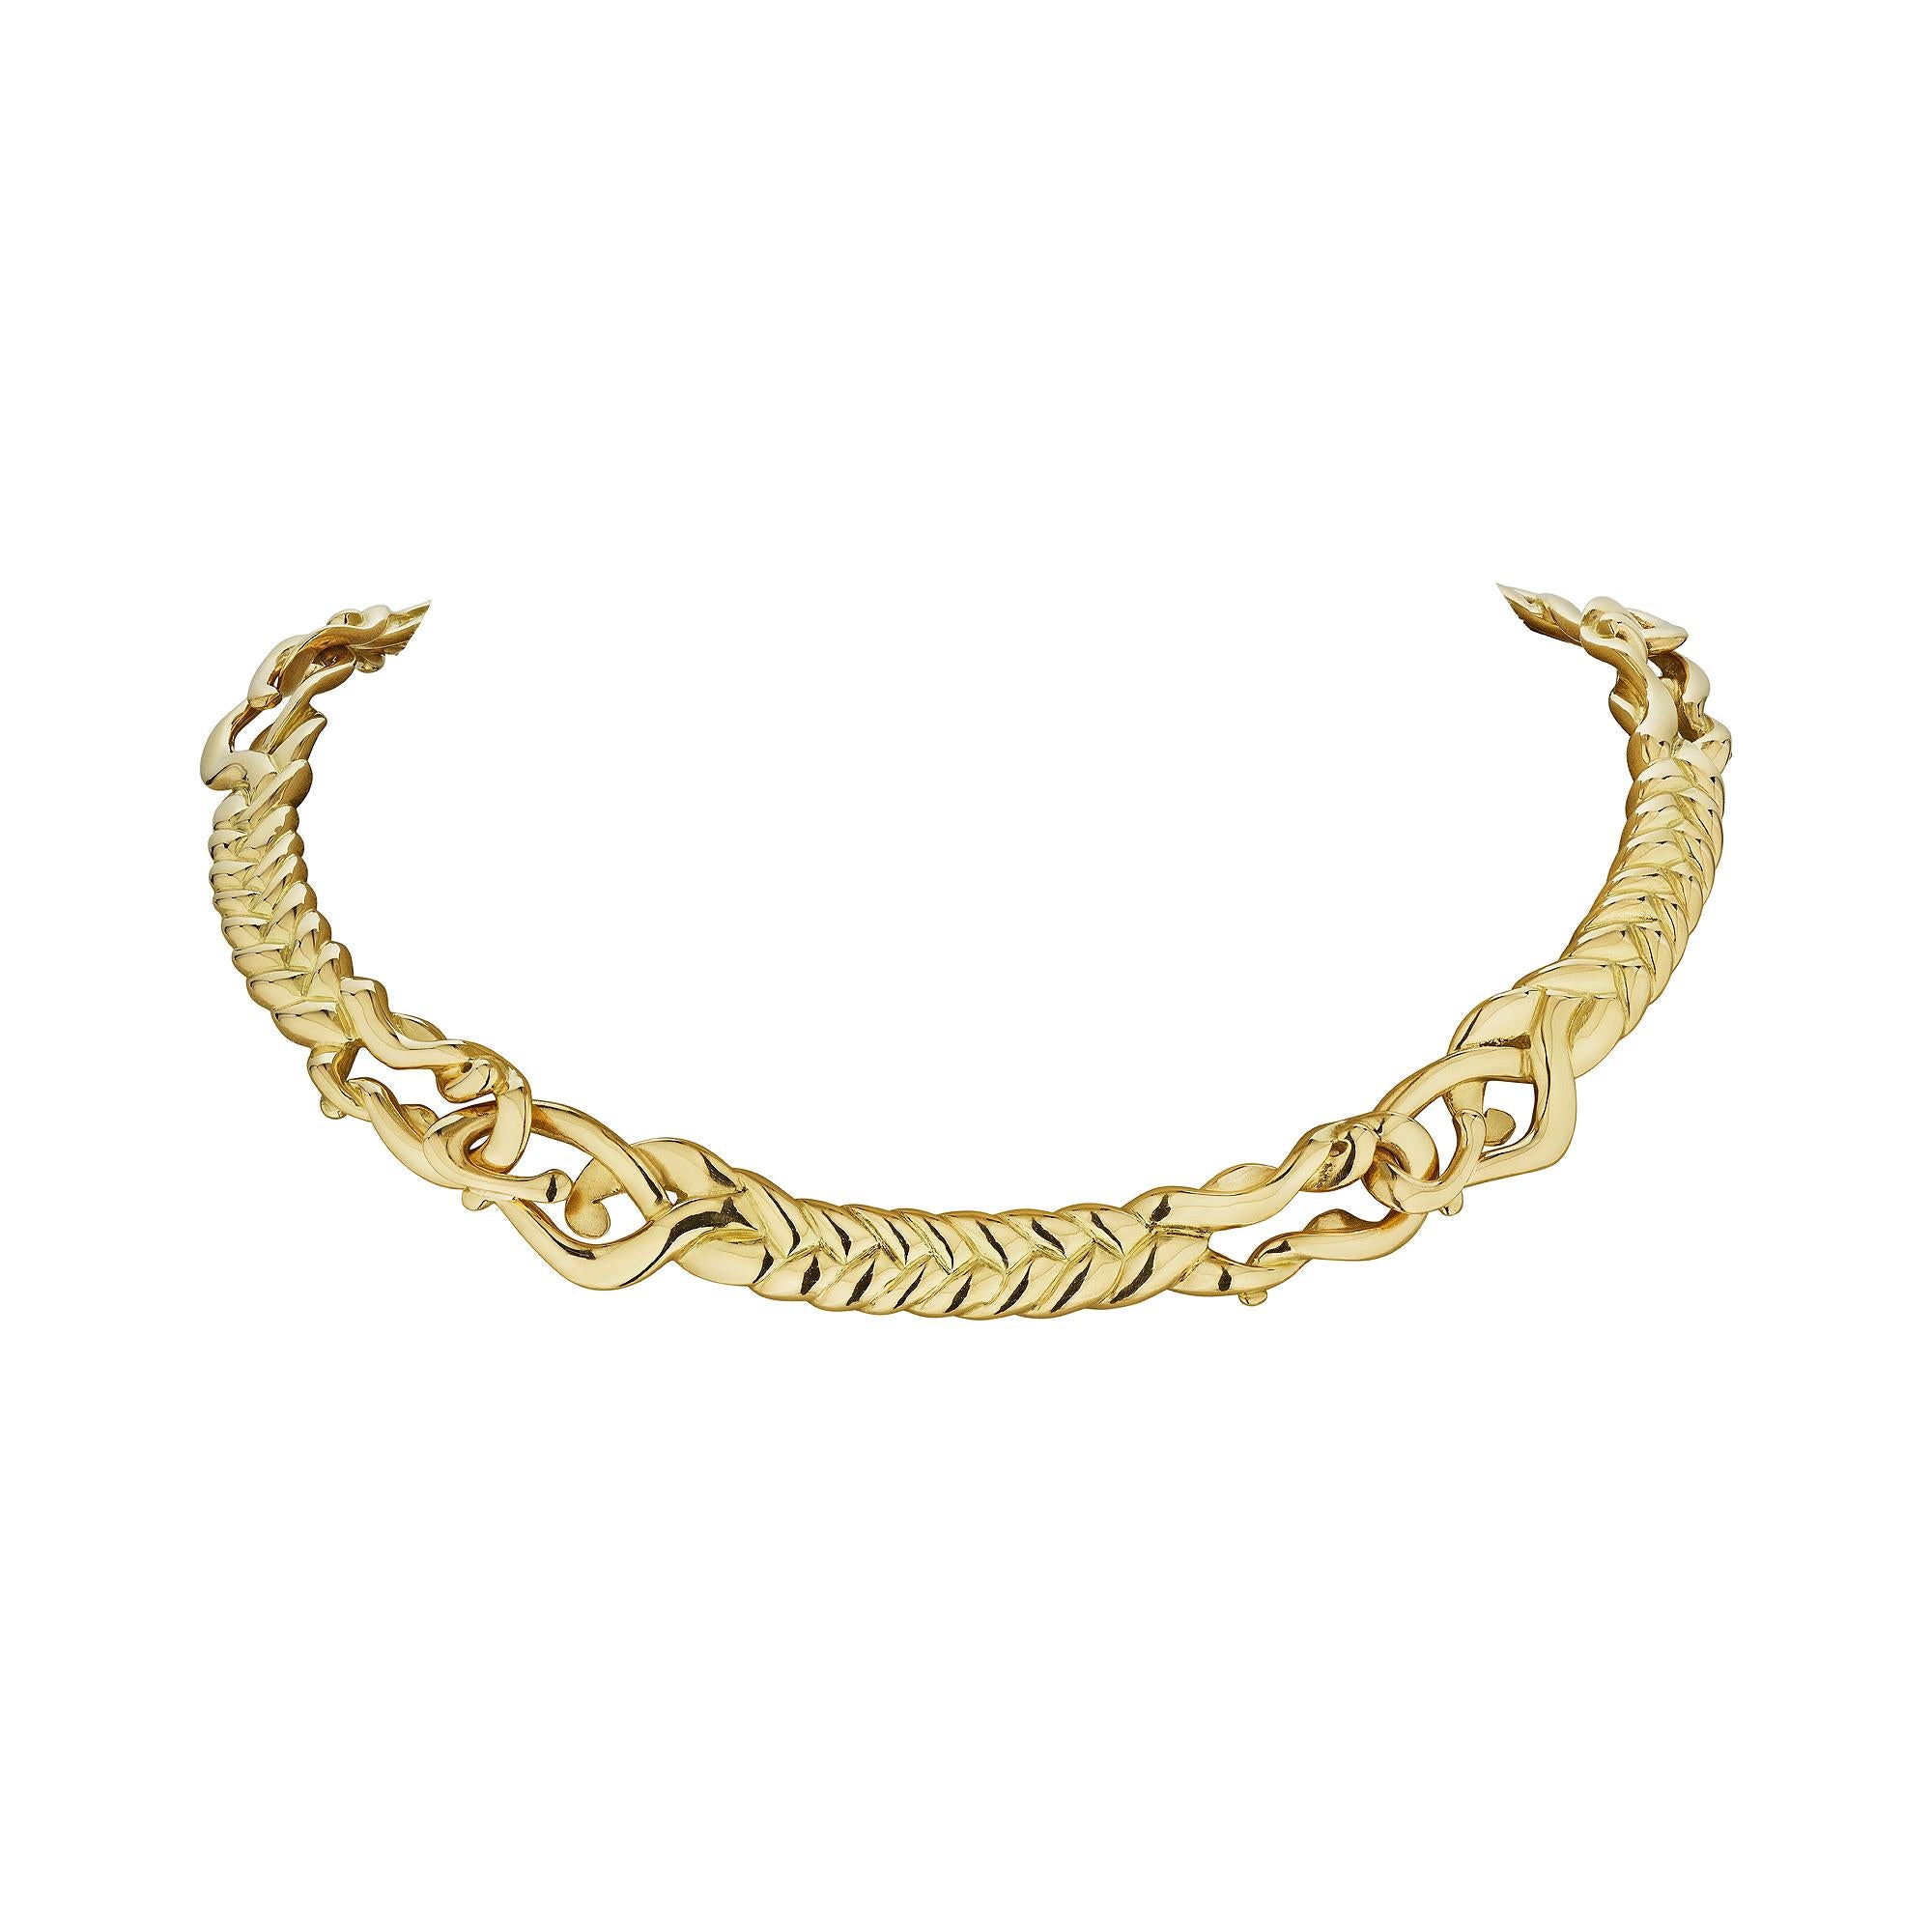 Angela Cummings for Tiffany & Co. modernist herringbone chain link collar necklace is the accessory you will find yourself always reaching for.  With its one-of-a-kind design and its warm rich patina, this eye catching necklace will work 24/7.  Easy